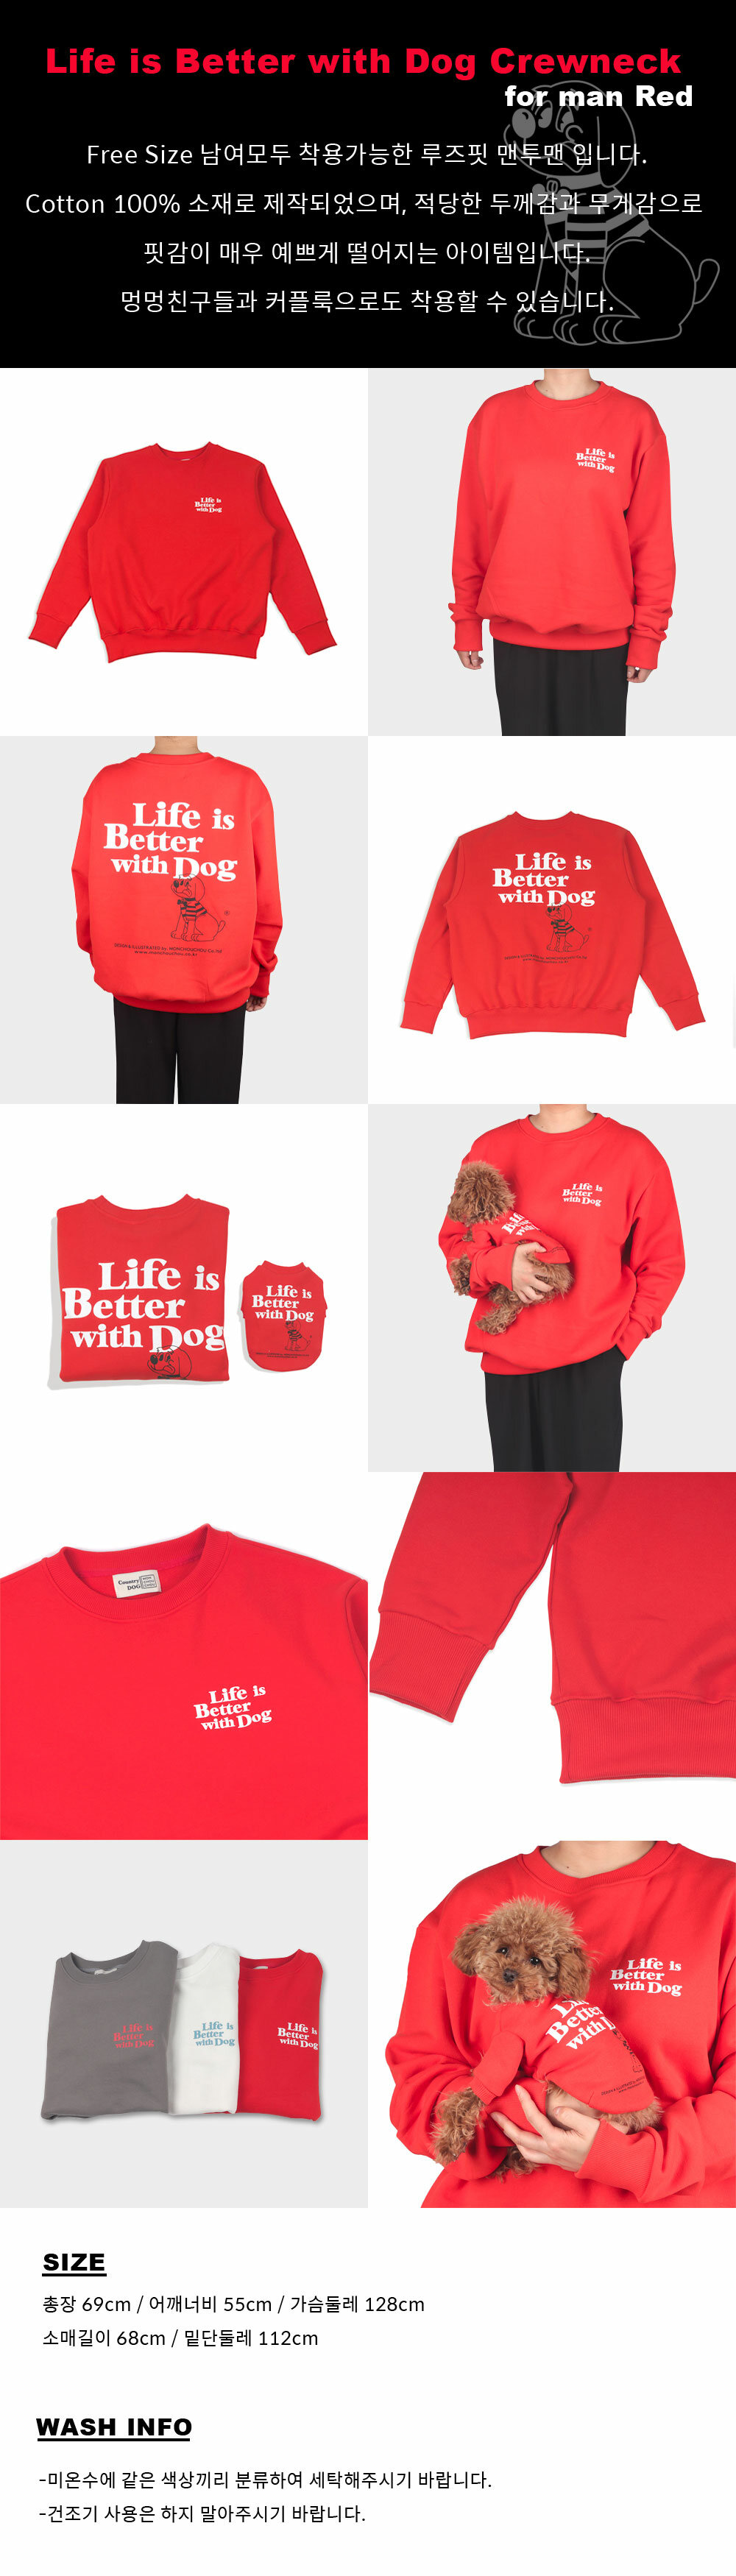 Life-is-Better-with-Dog-Crewneck-for-man-Red-Info.jpg